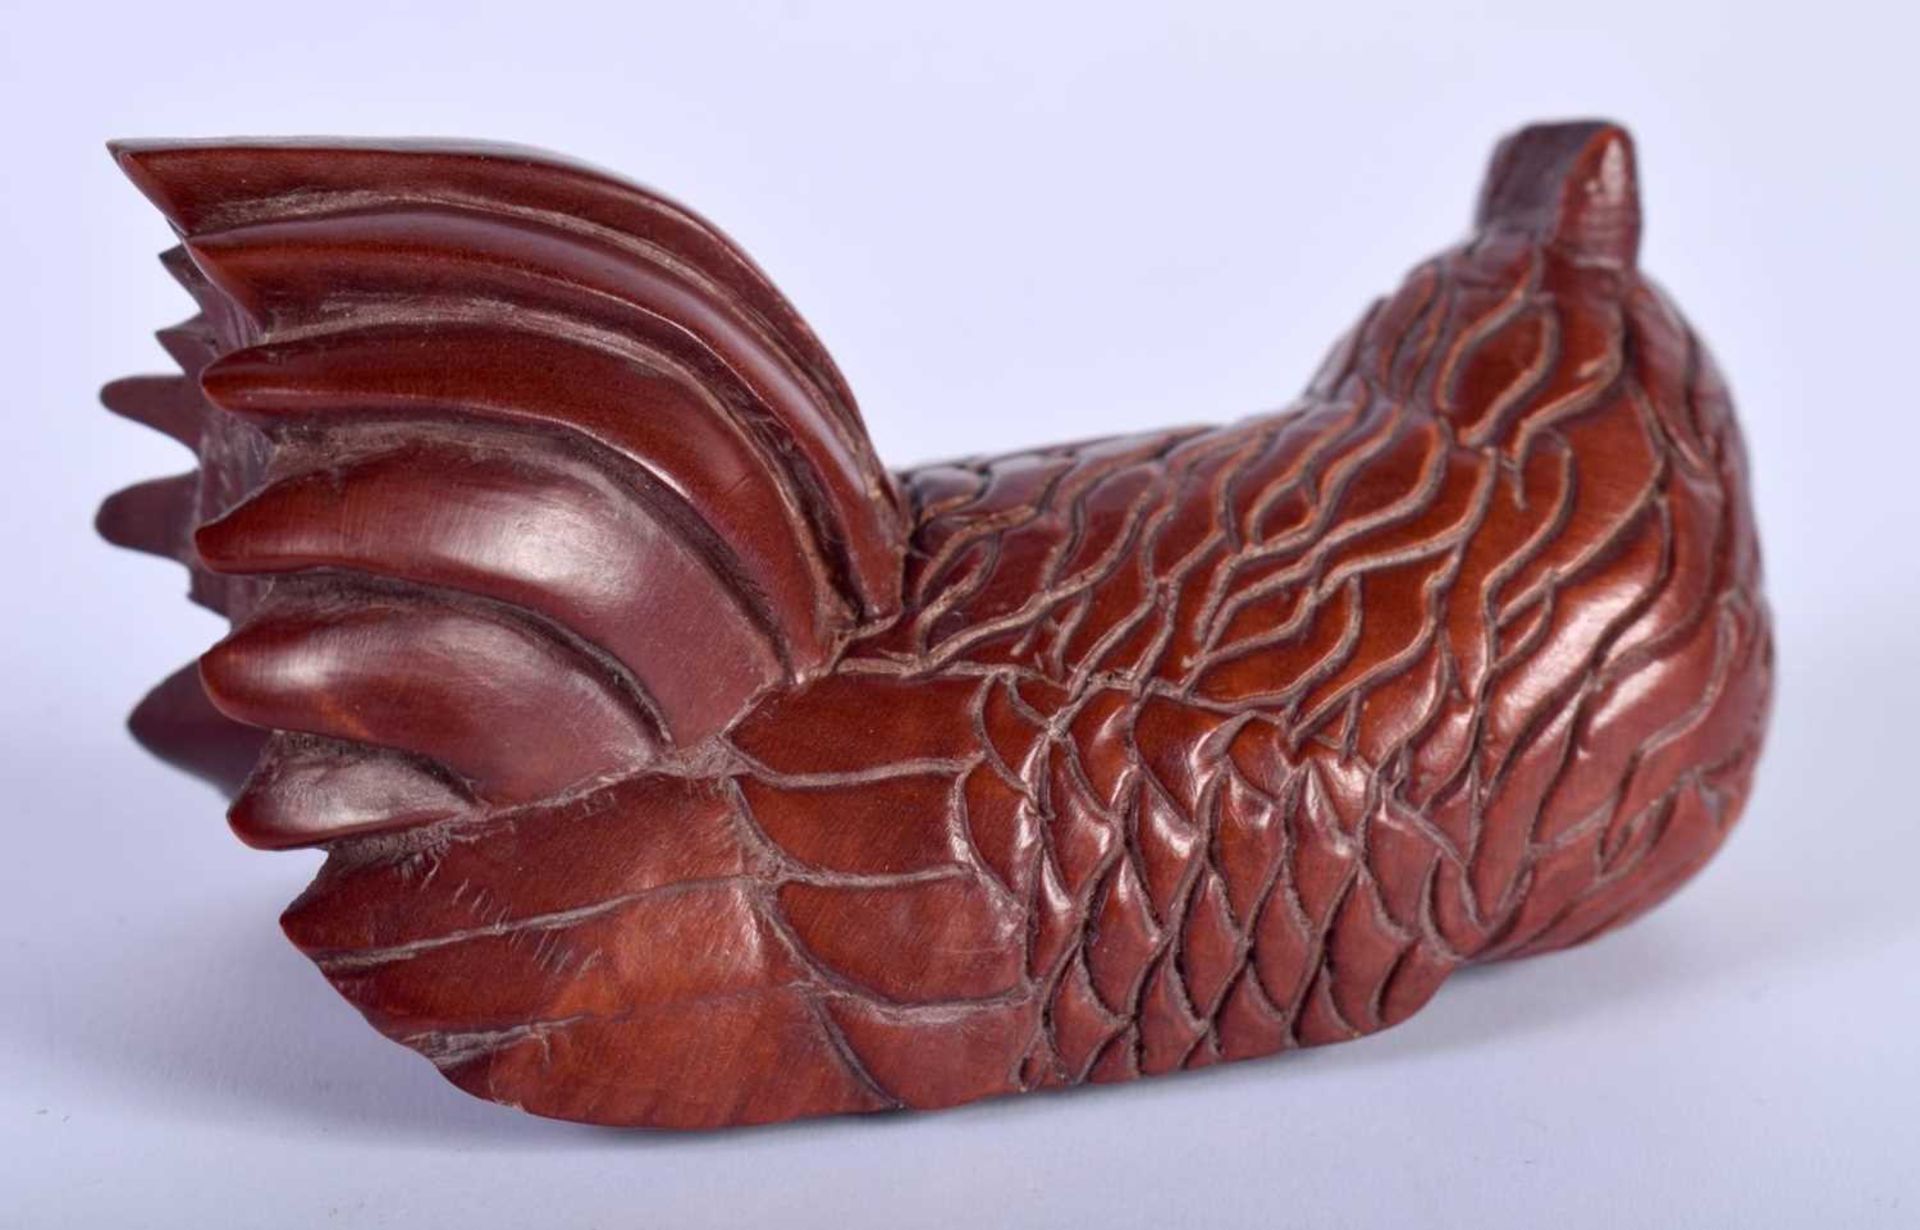 A Carved Hardwood Netsuke of a Chicken. 2.9cm x 6.2cm x 3.1cm. Weight 29g - Image 2 of 3